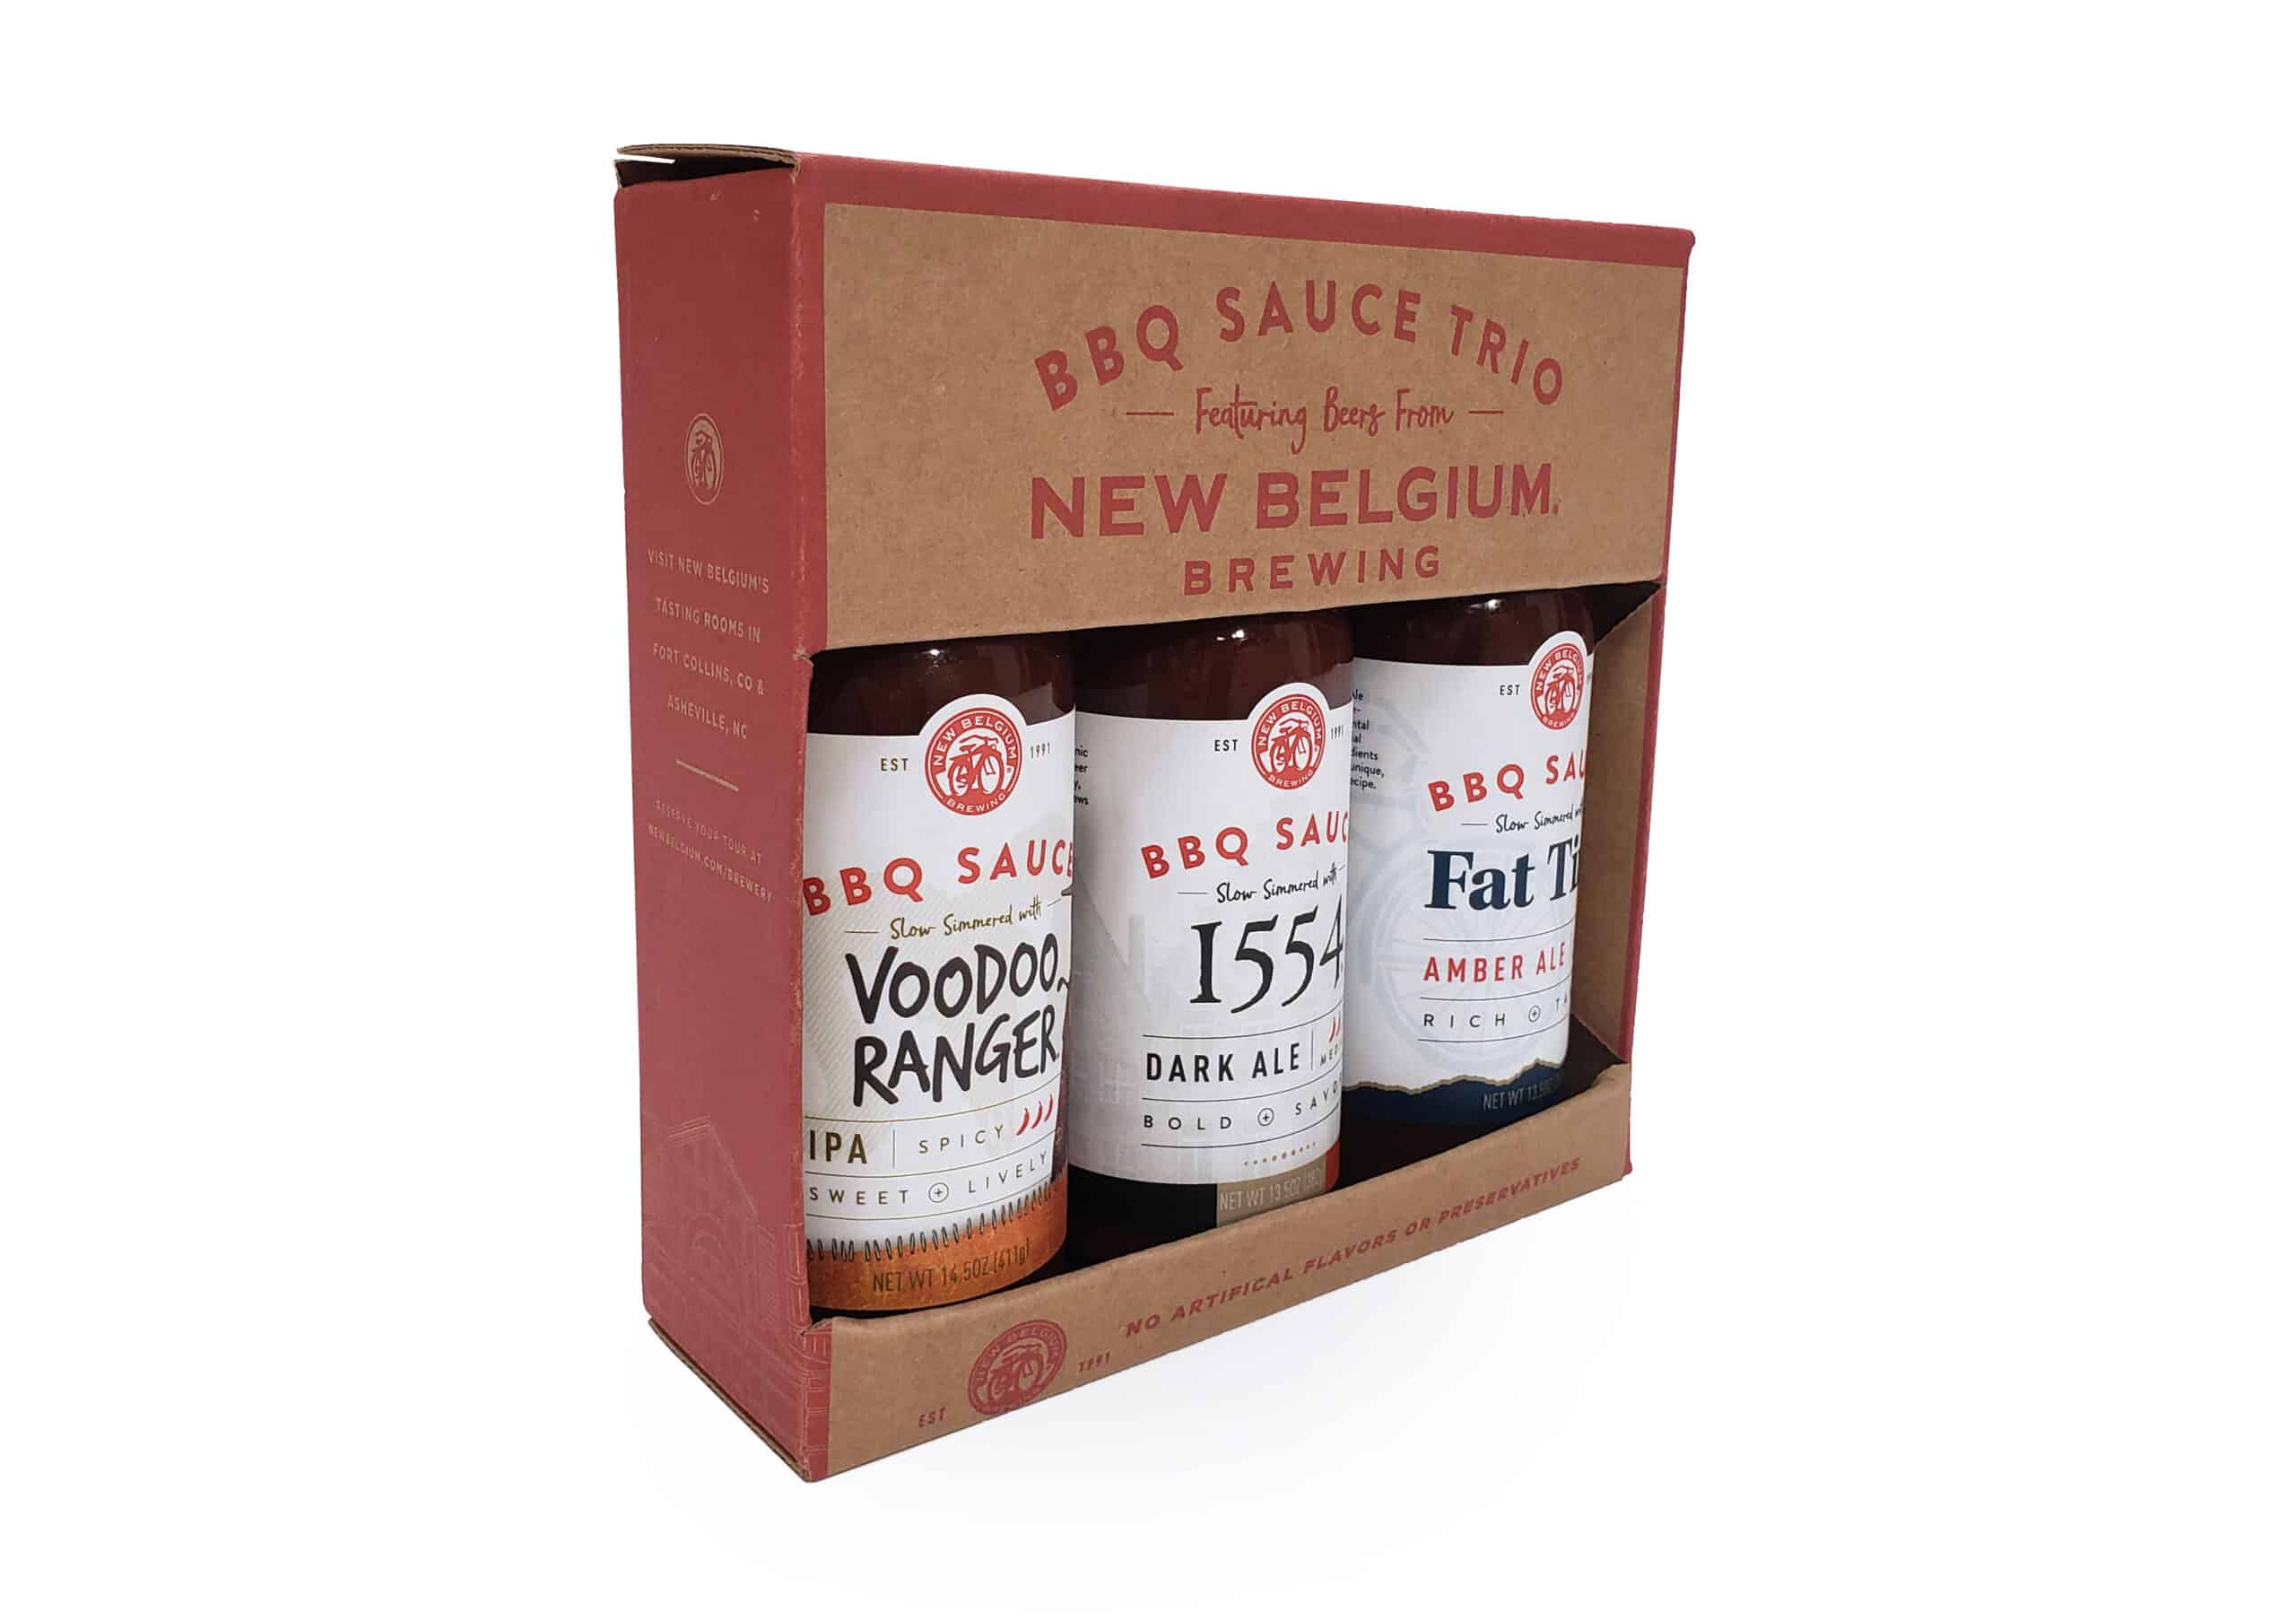 Custom packaging design one color print on kraft packaging with cutout to display three flavors of BBQ sauce